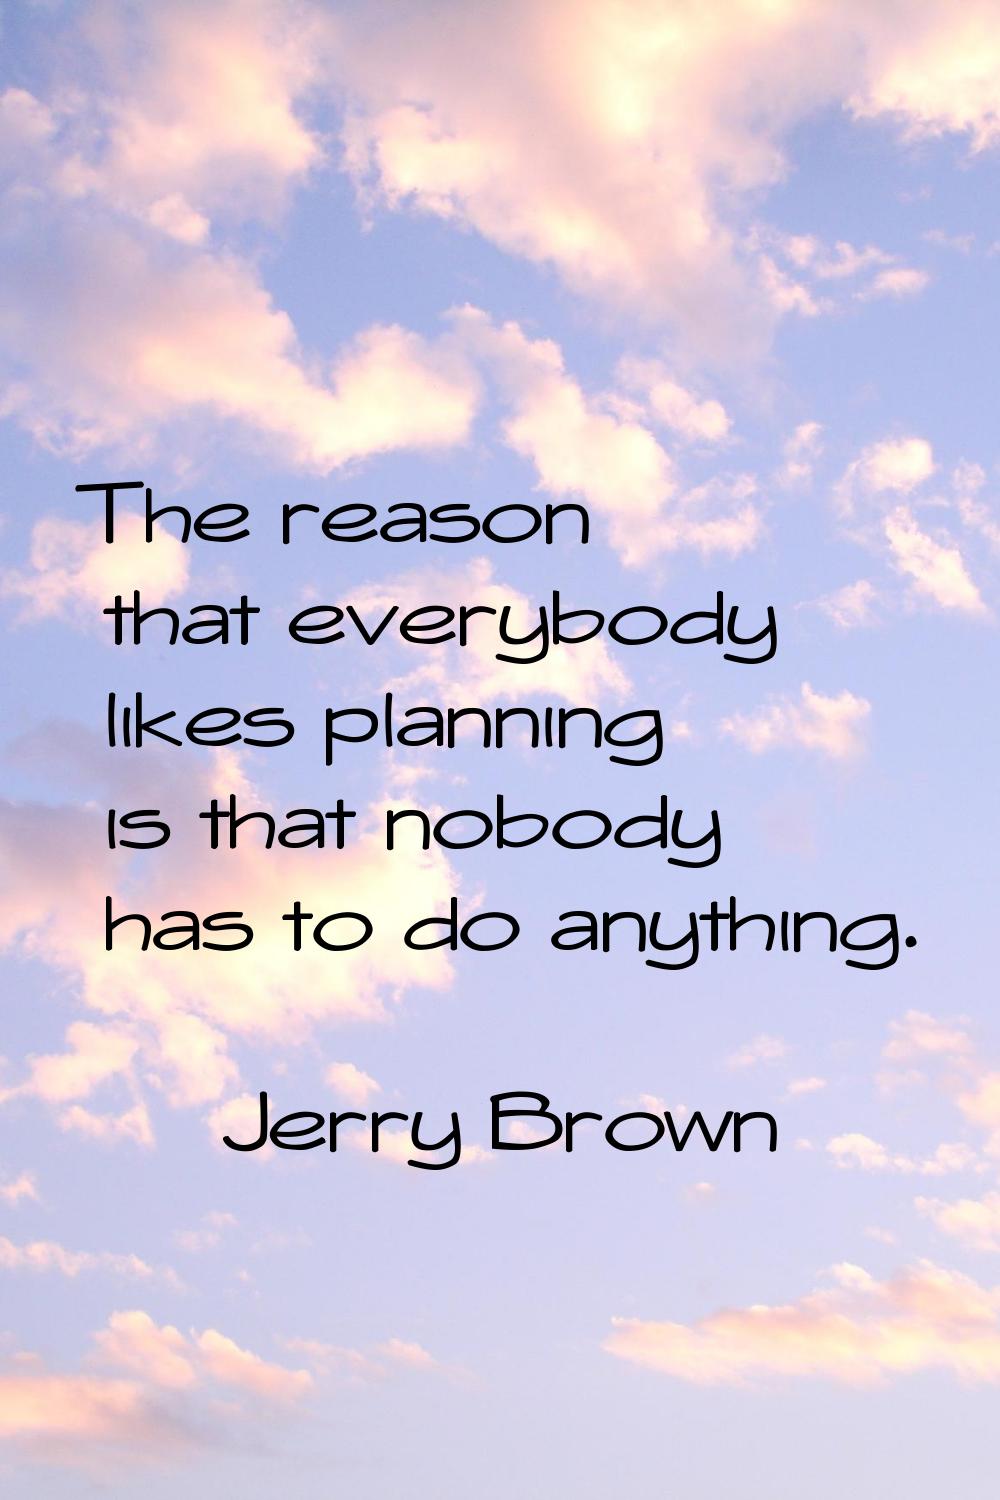 The reason that everybody likes planning is that nobody has to do anything.